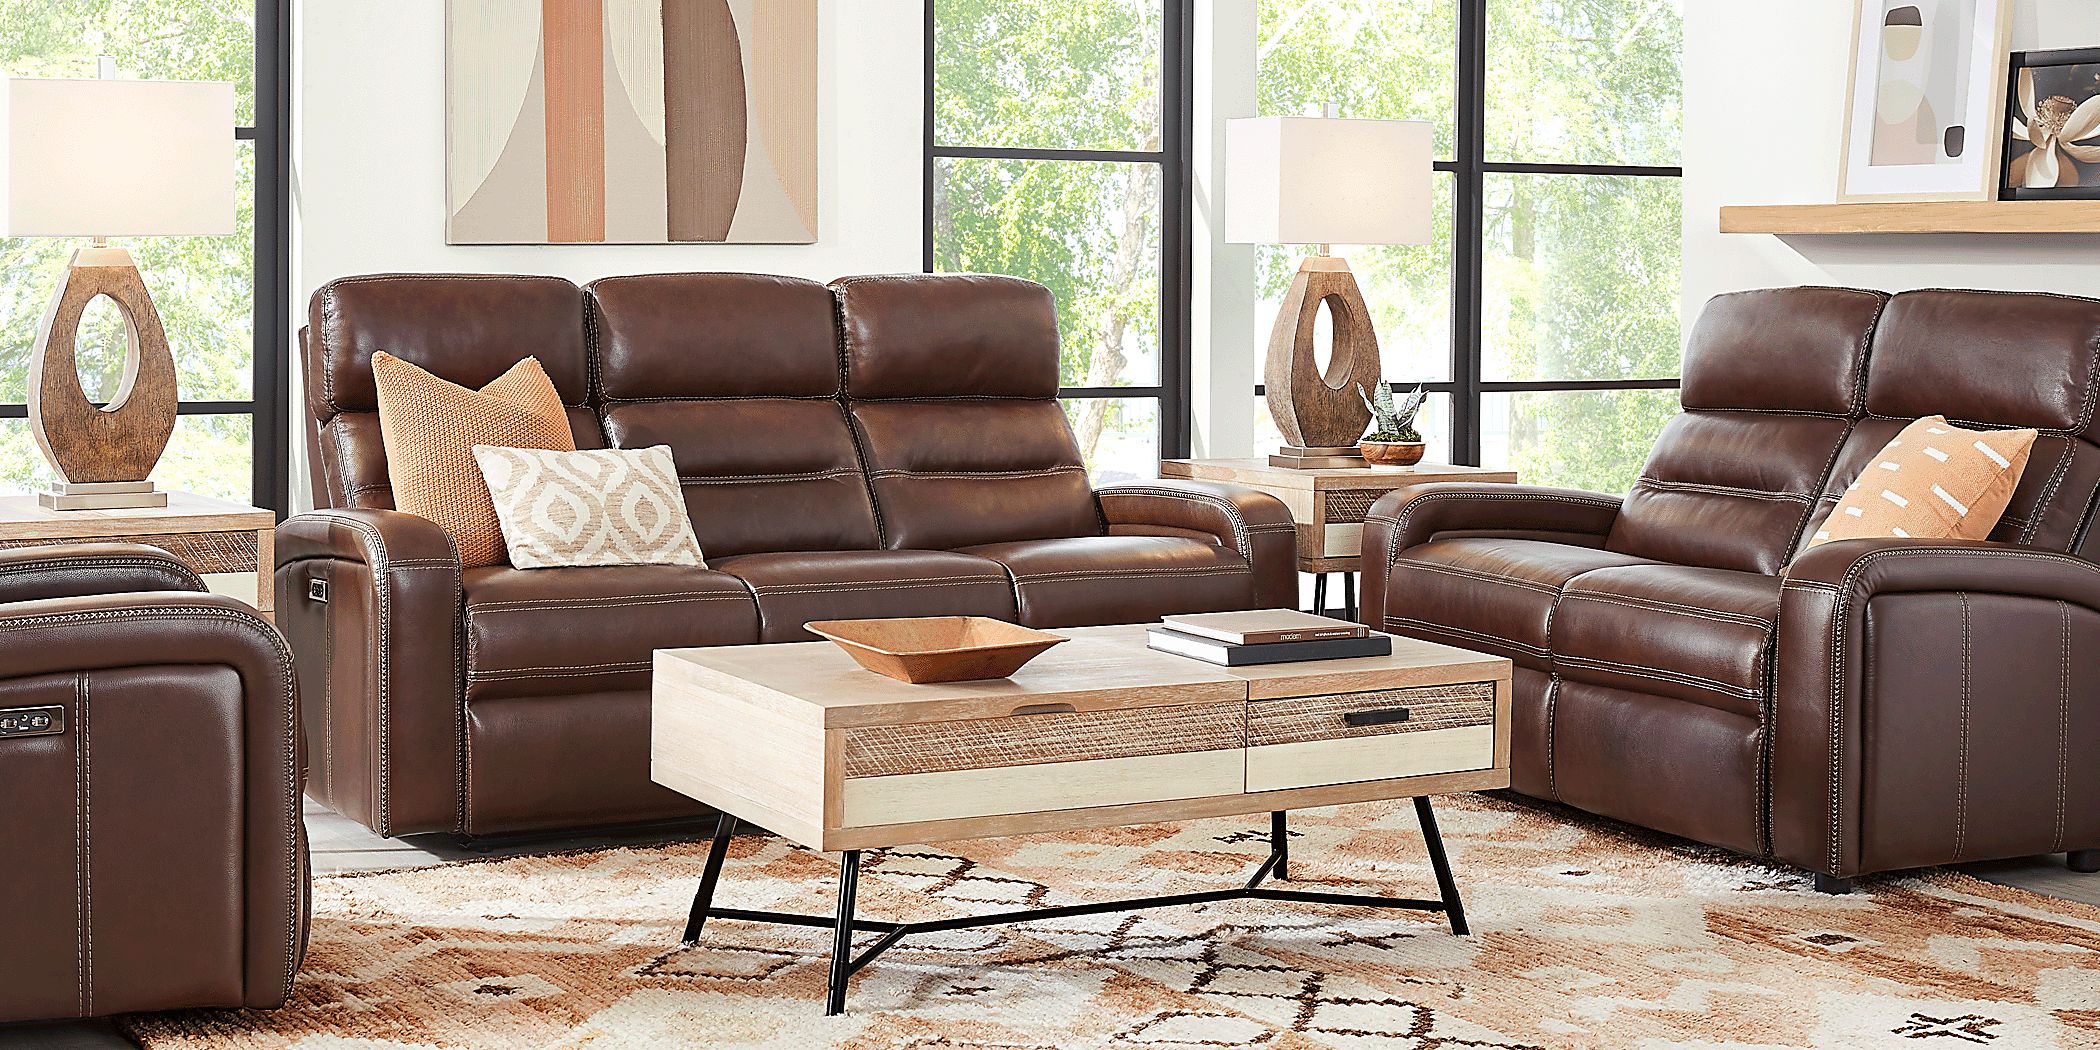 Sierra Madre Brown Leather 5 Pc Living